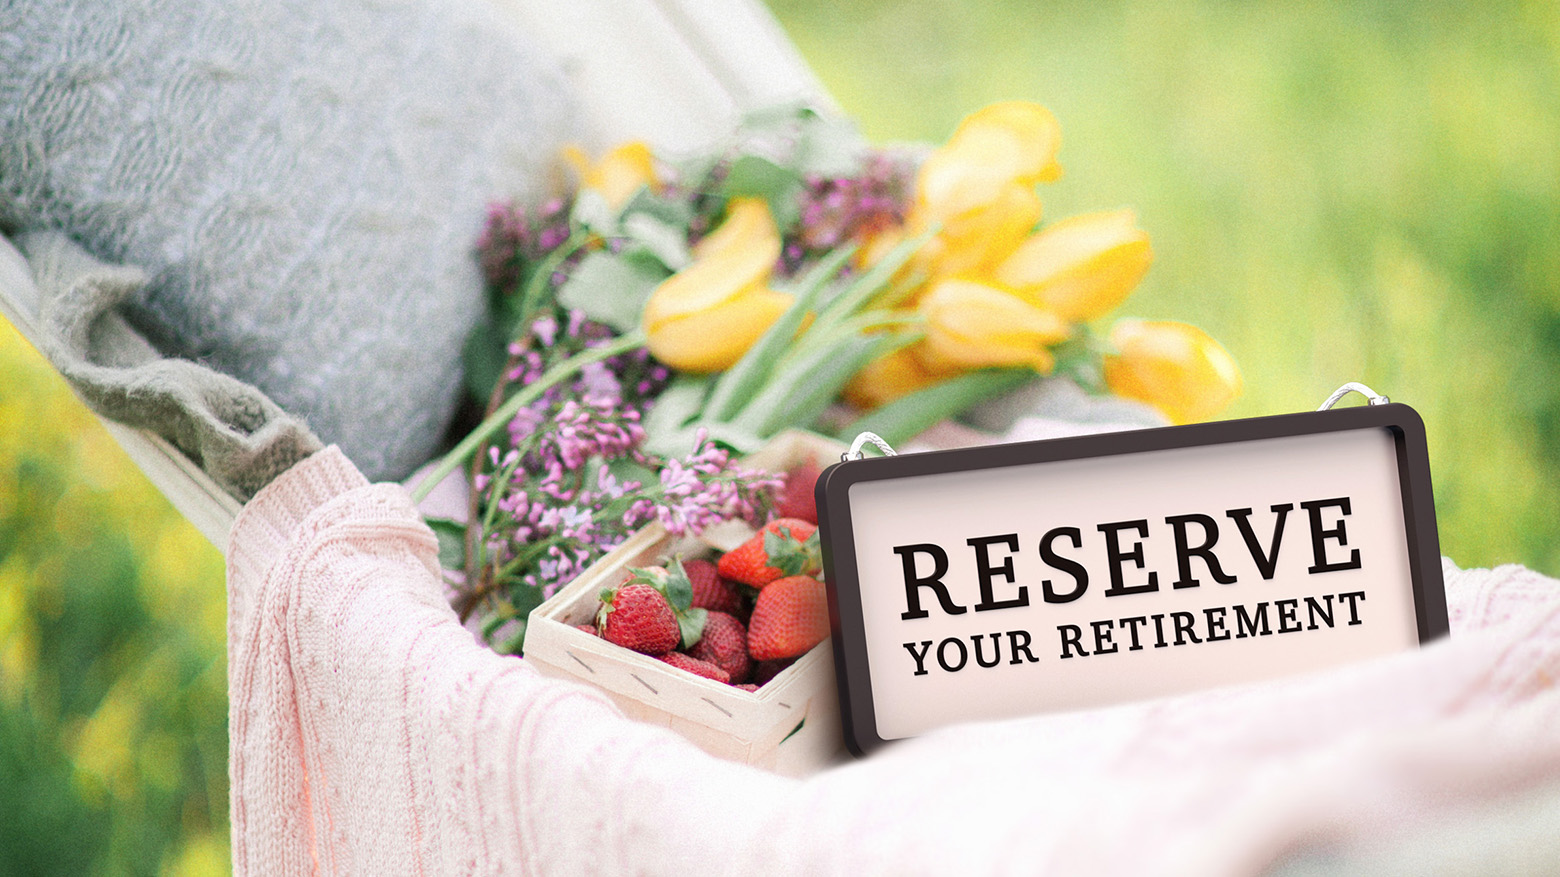 A bouquet of flowers in a hammock with a Reserve Your Retirement sign